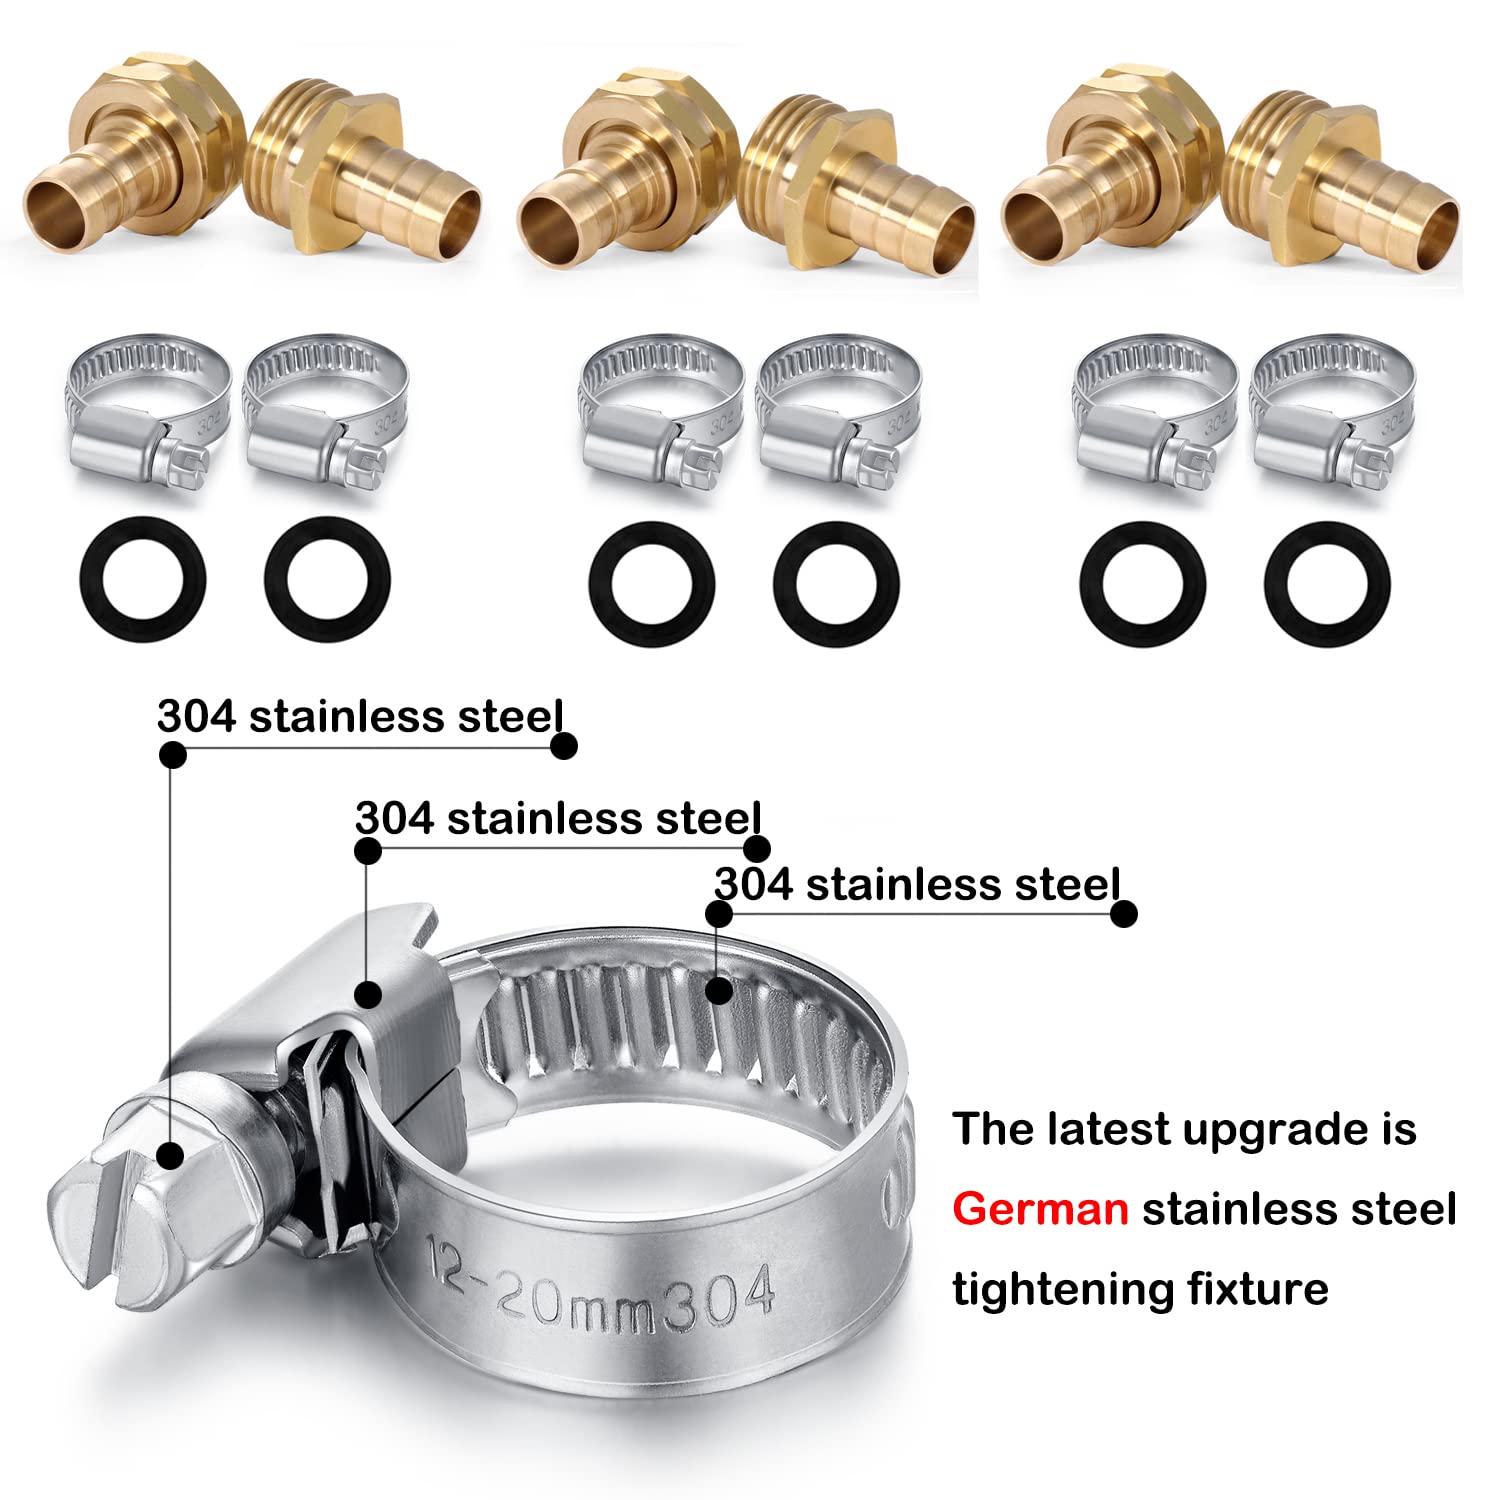 YELUN Solid Brass Garden Hose Repair Connector with Clamps Hose End Repair Kit,Fit for 5/8"Garden Hose Fitting,Male and Female Hose Fittings(5/8"-3 Set)